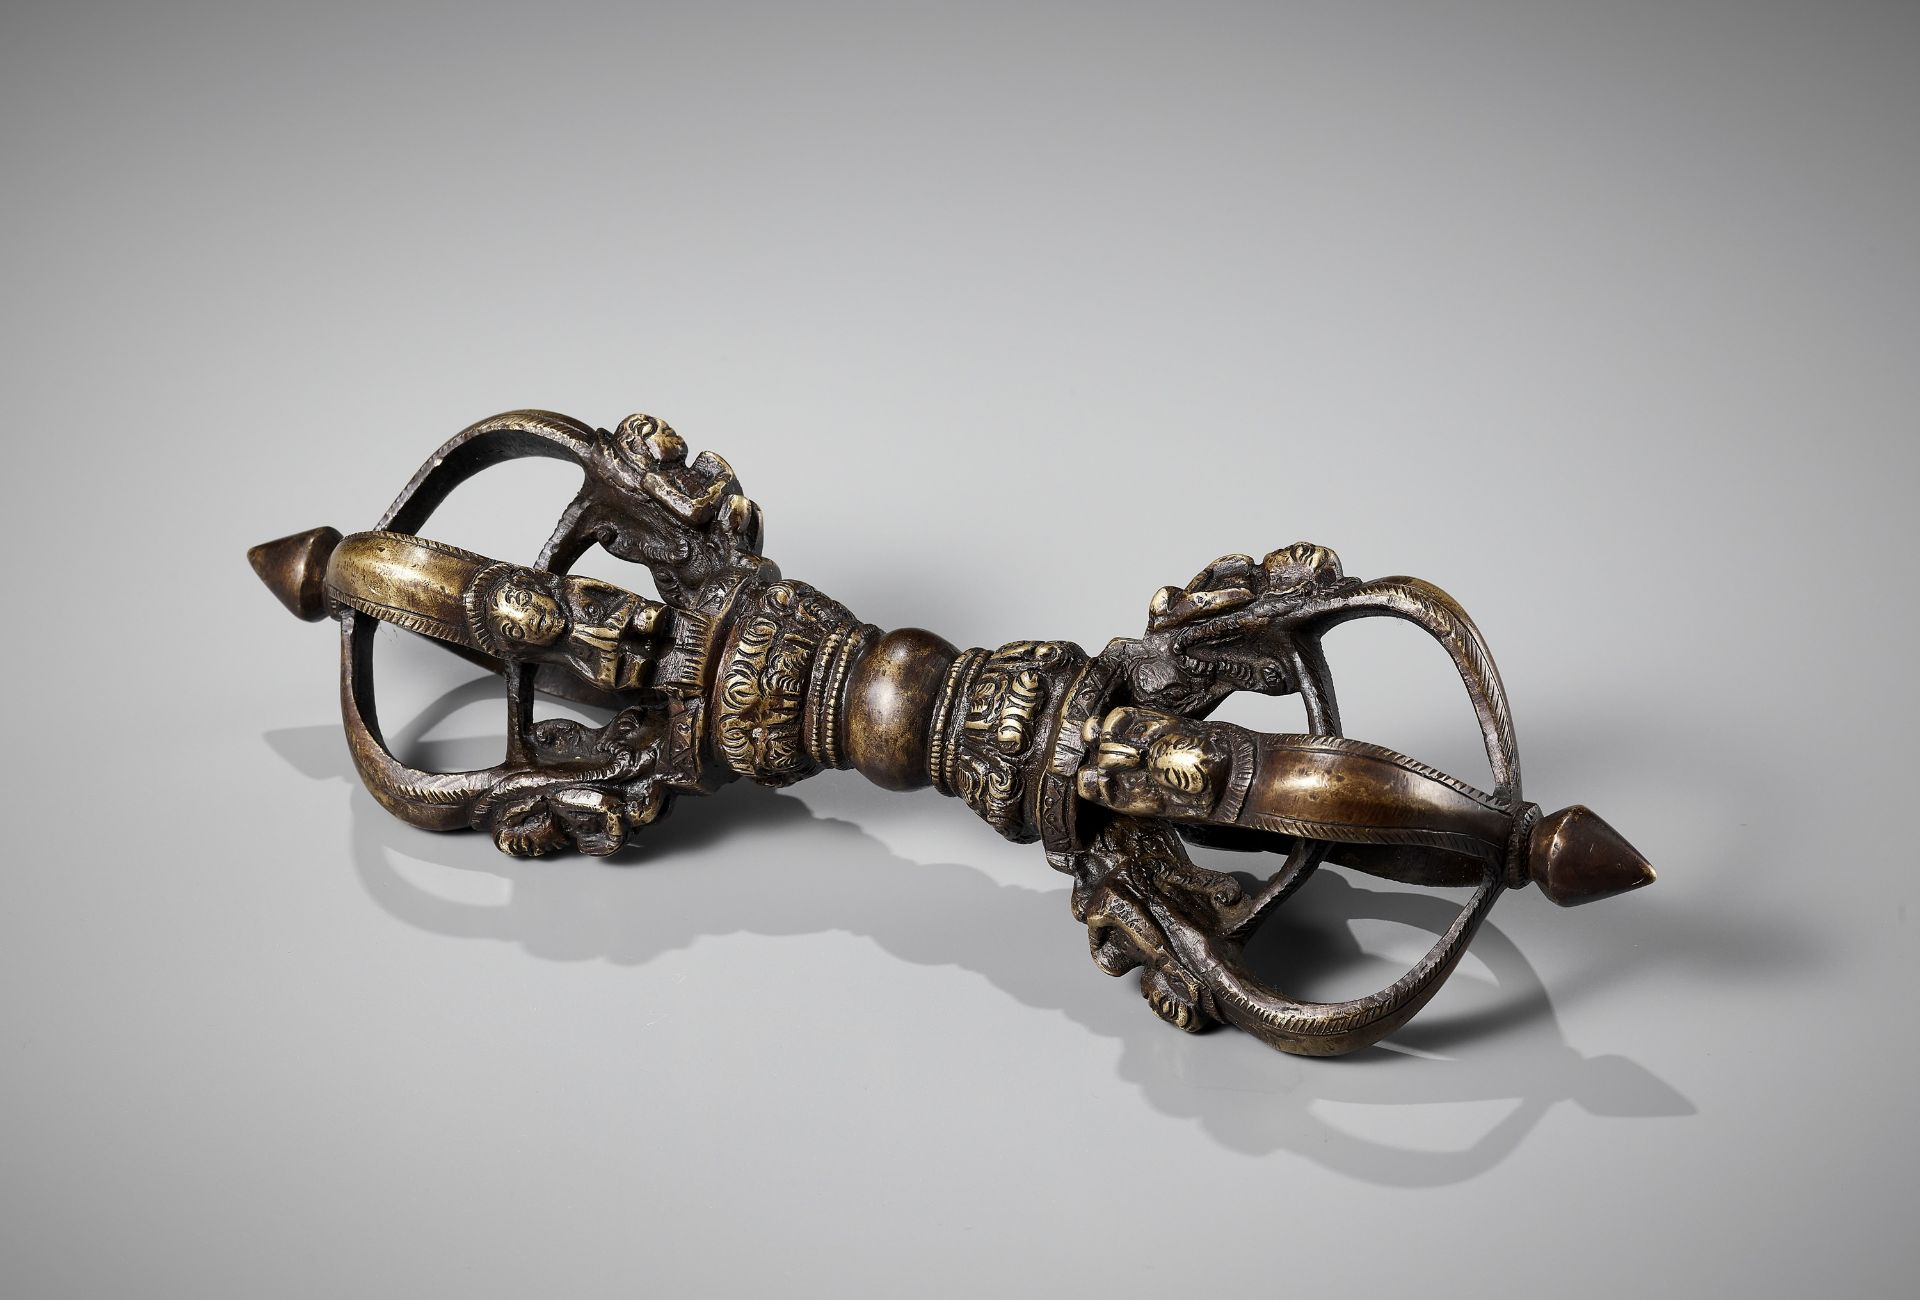 A LARGE AND MASSIVE BRONZE VAJRA, 17TH-18TH CENTURY